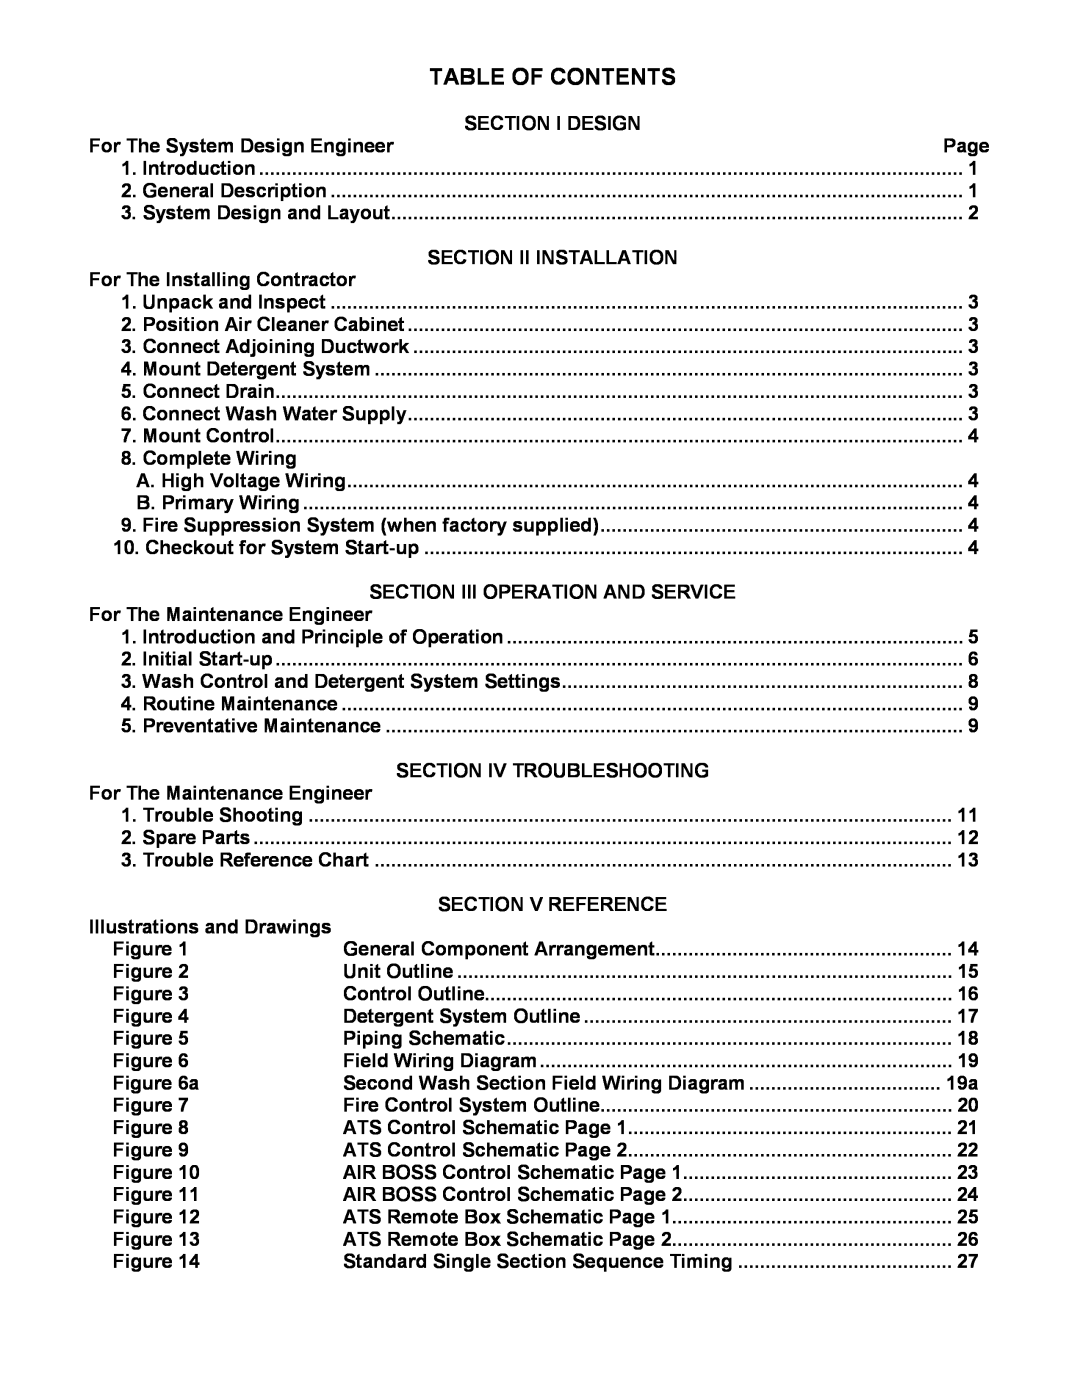 Trion Air Boss ATS, 147207-001 manual Table Of Contents 